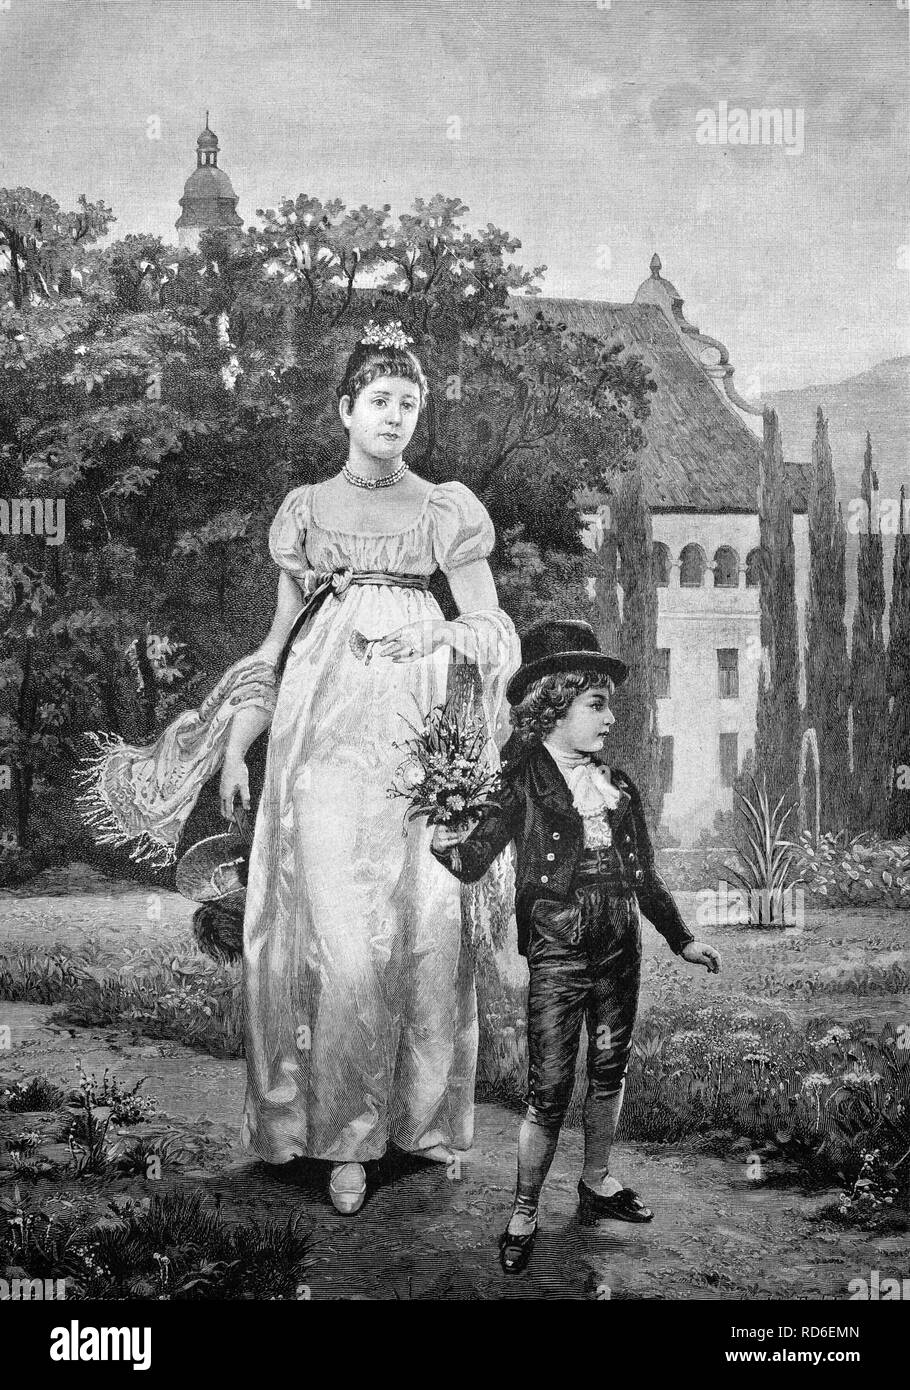 Child has picked a bunch of forest flowers for his mother, historical illustration circa 1893 Stock Photo